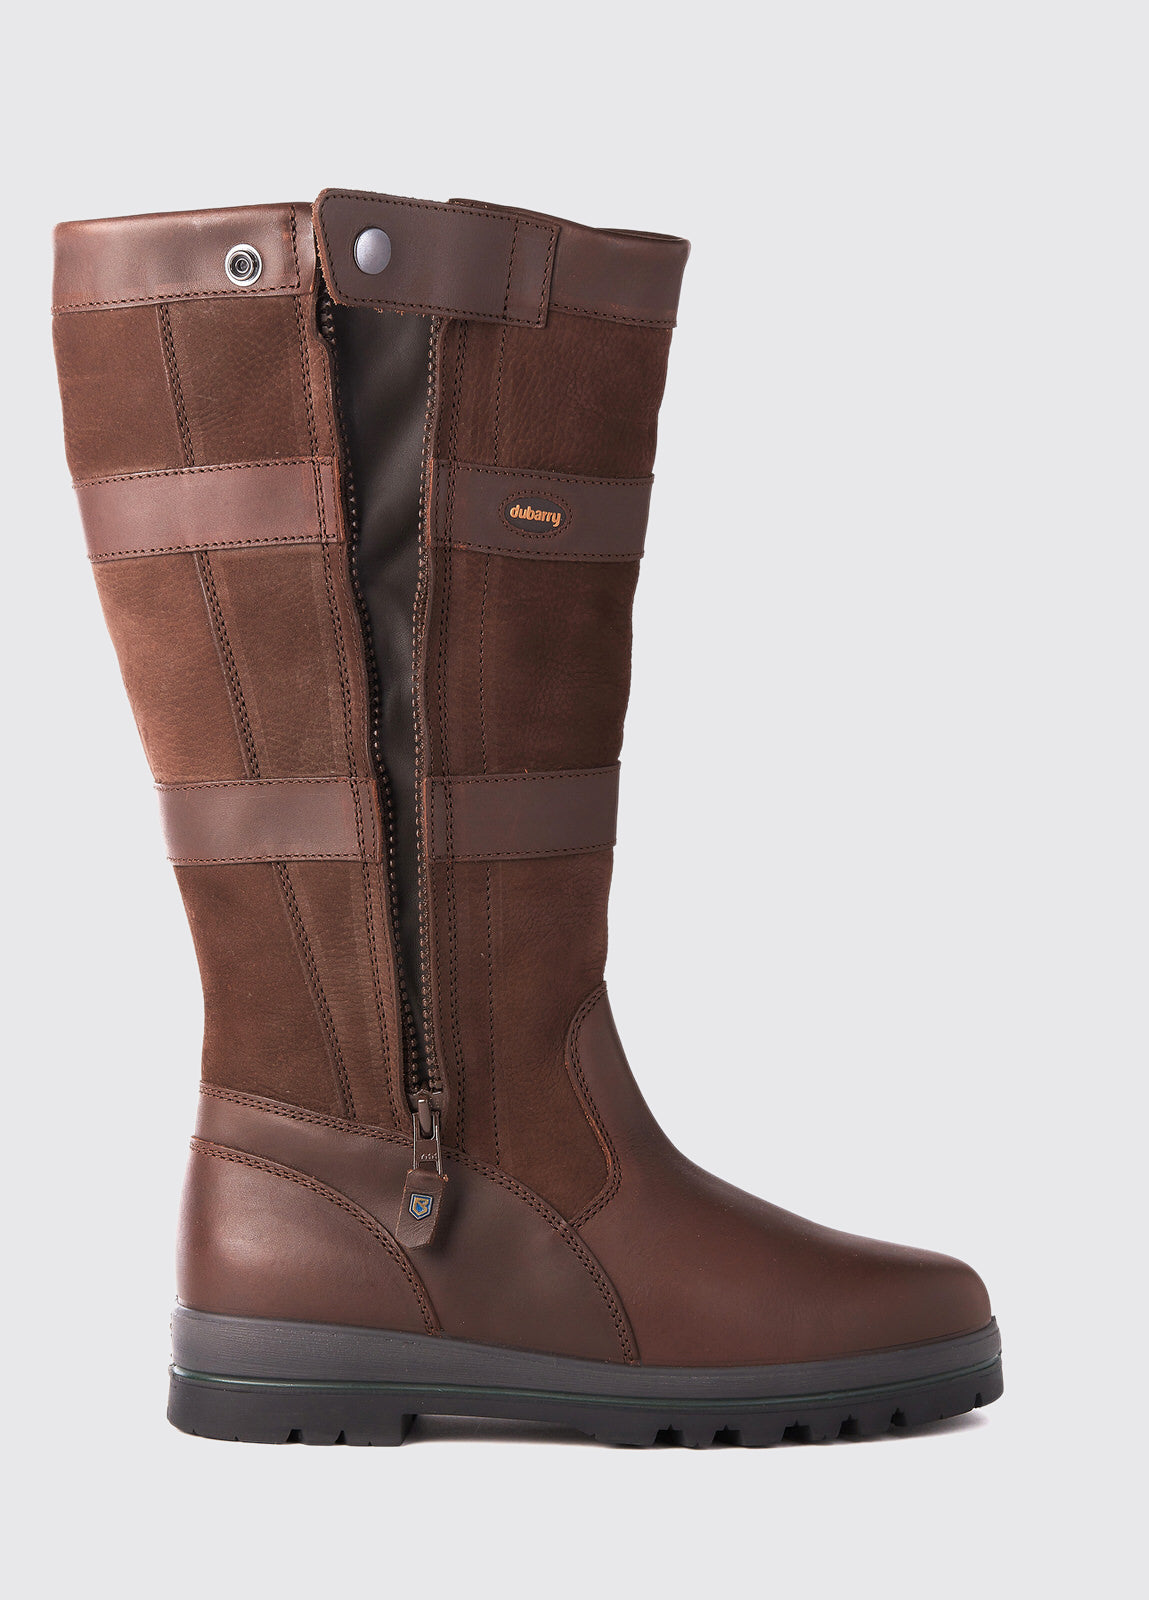 Wexford Country Boot - Java